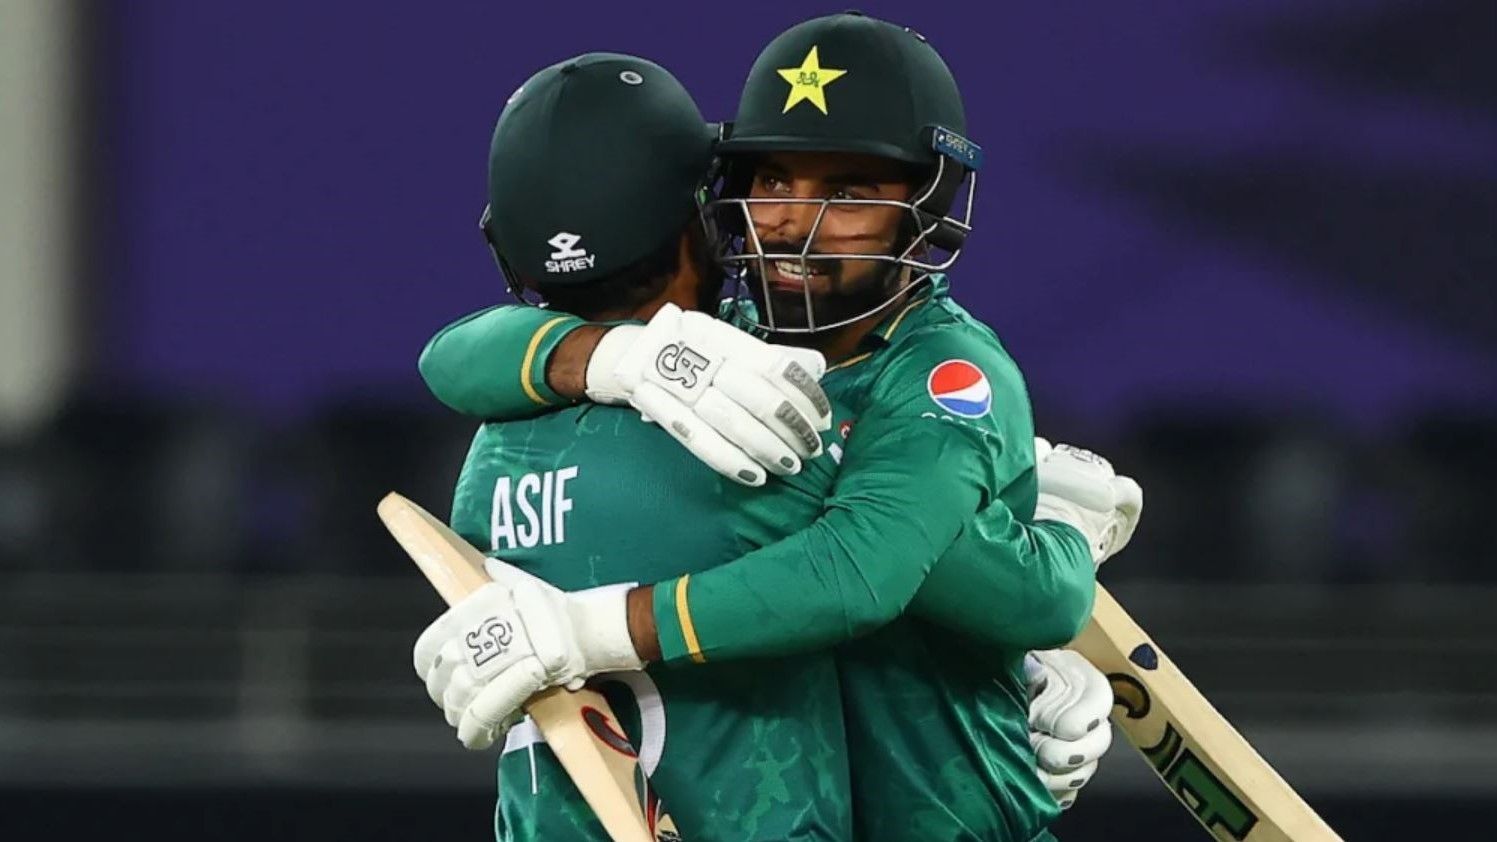 Asif Ali pulled off another incredible win for Pakistan in the T20 World Cup